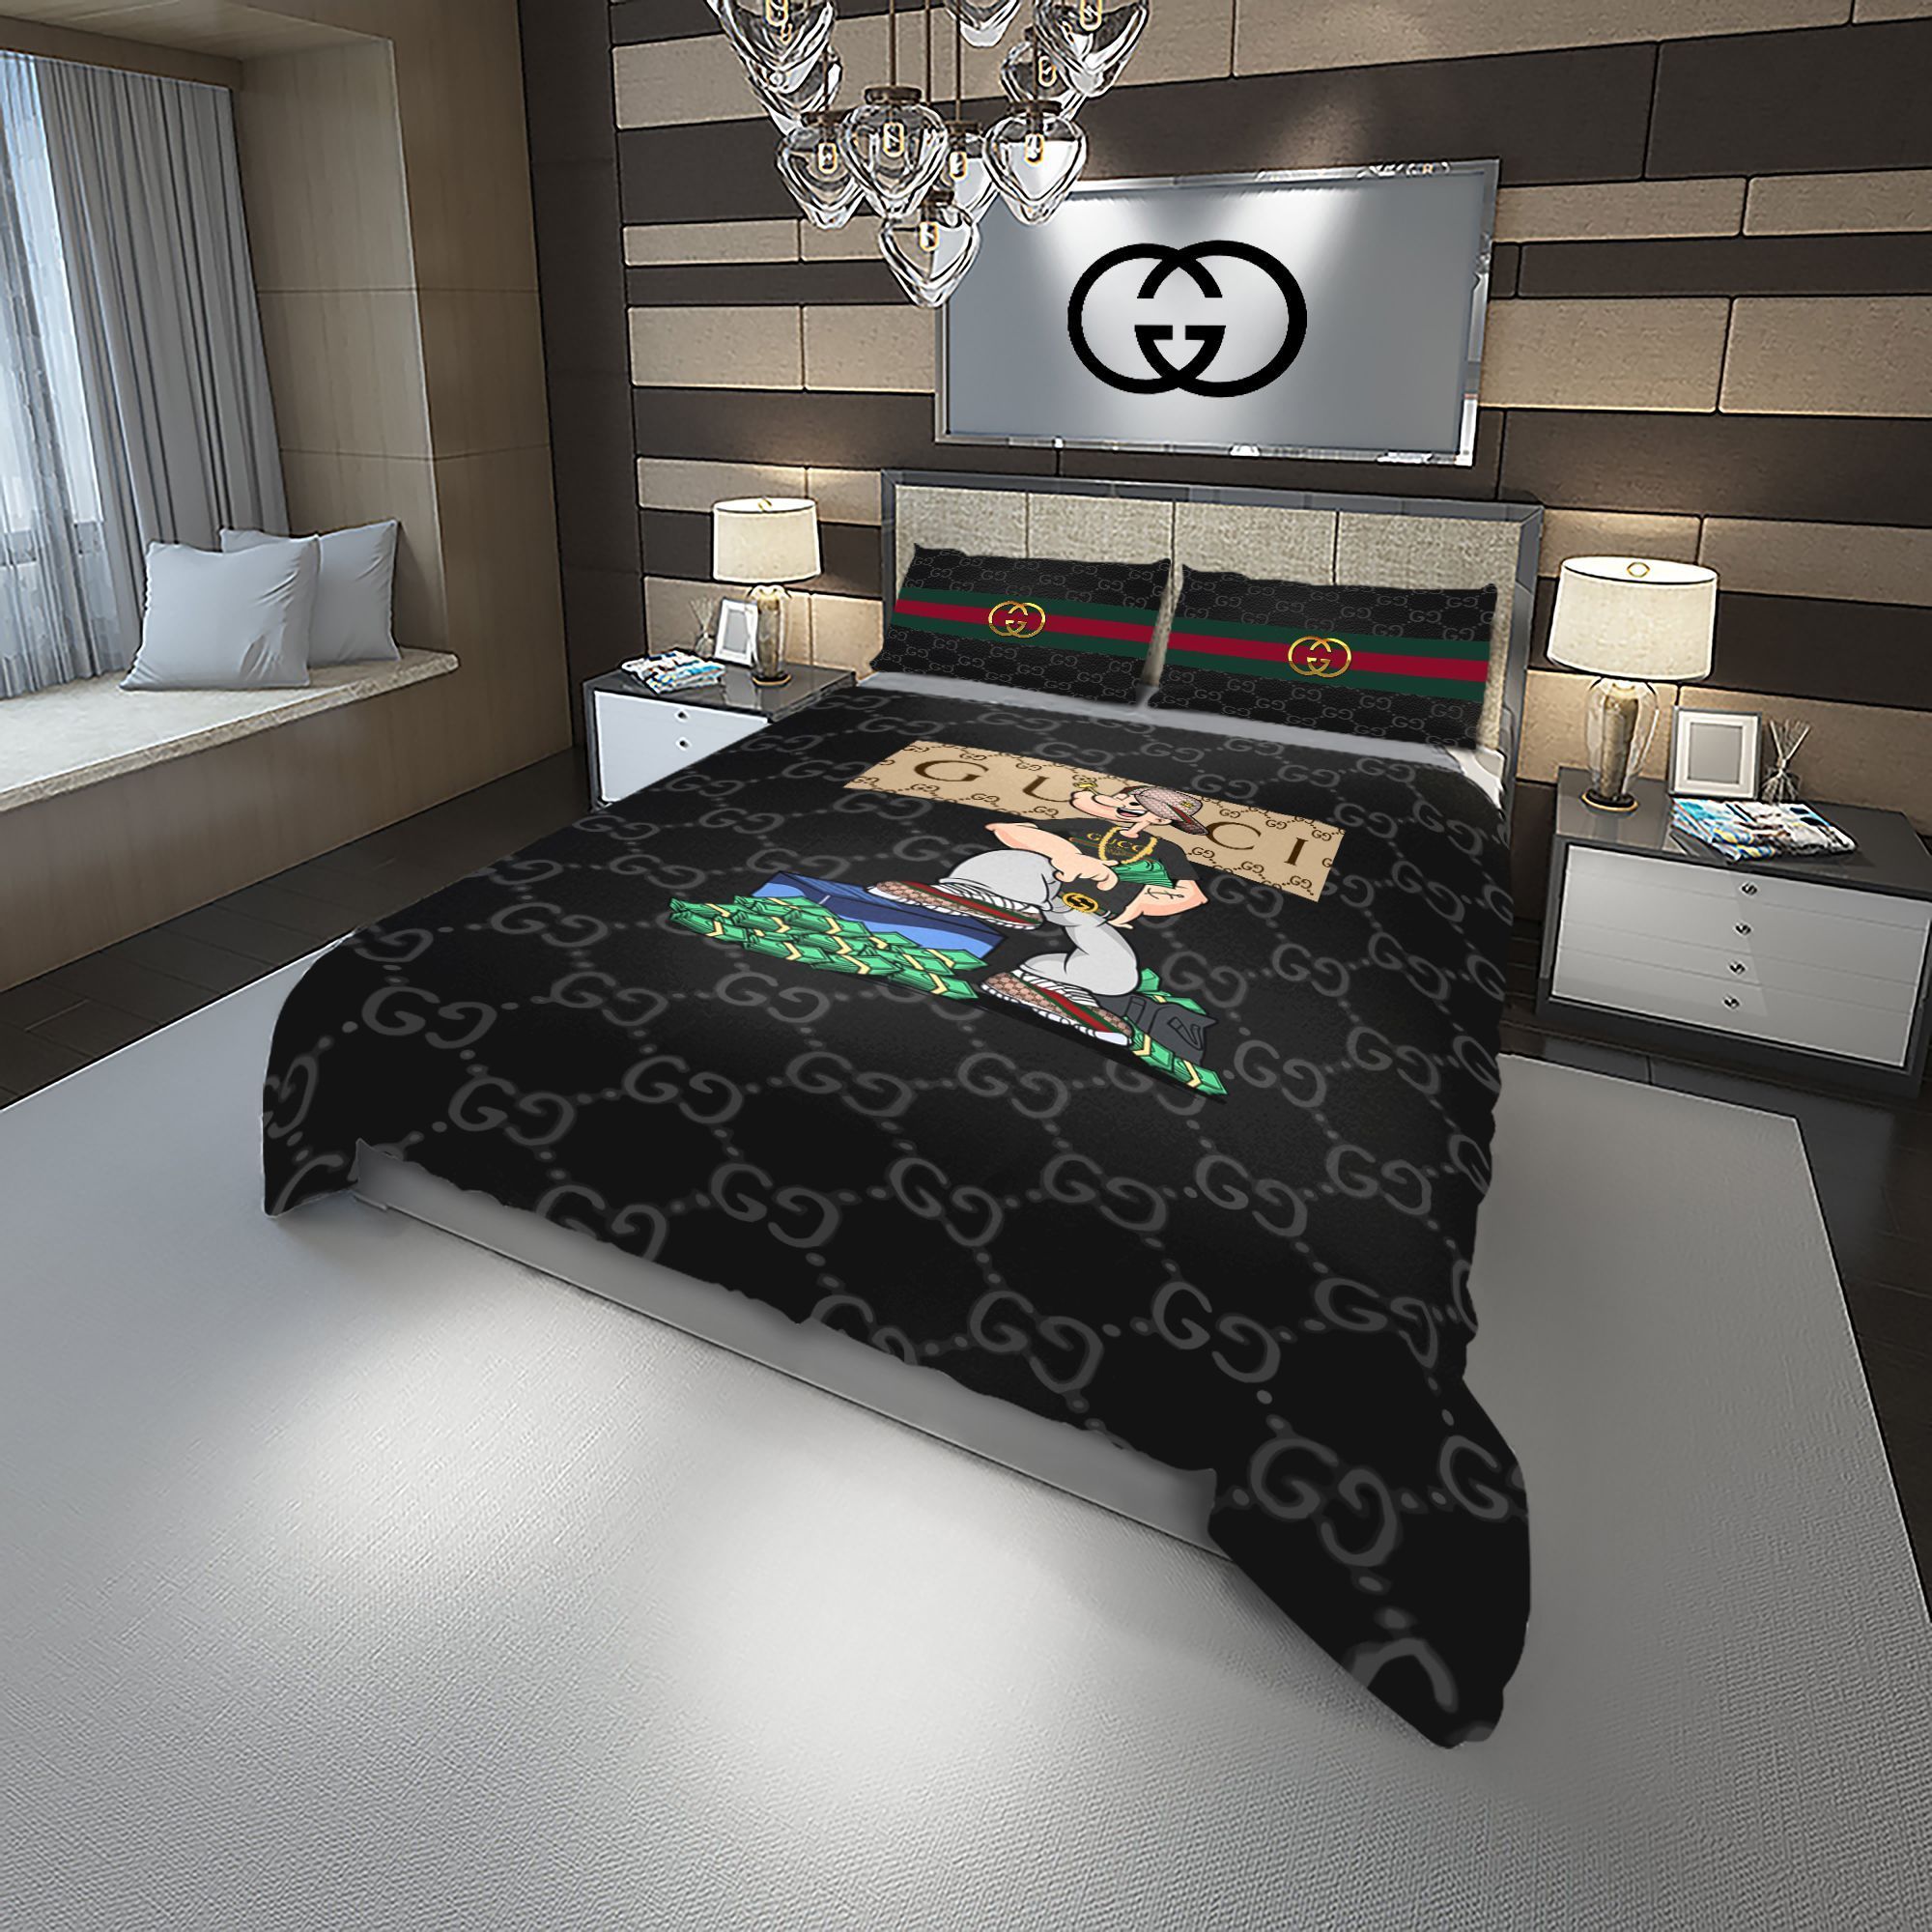 Let me show you about some luxury brand bedding set 2022 18